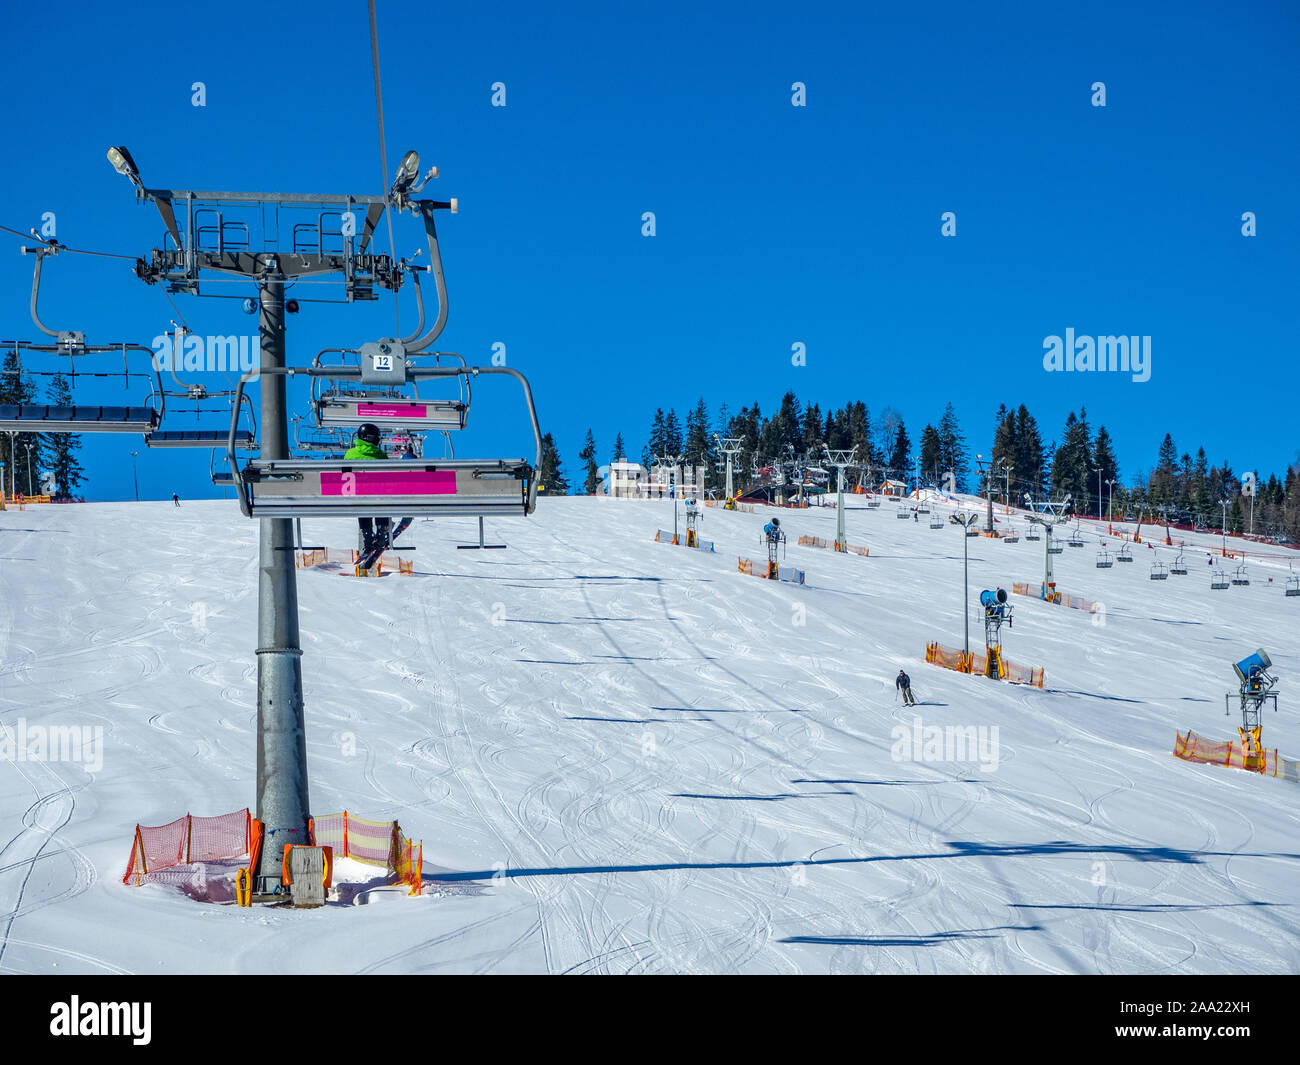 Ski slope with ski lifts (chairlifts and ski tow) and sow cannons in Bialka Tatrzanska  ski resort in Poland Stock Photo